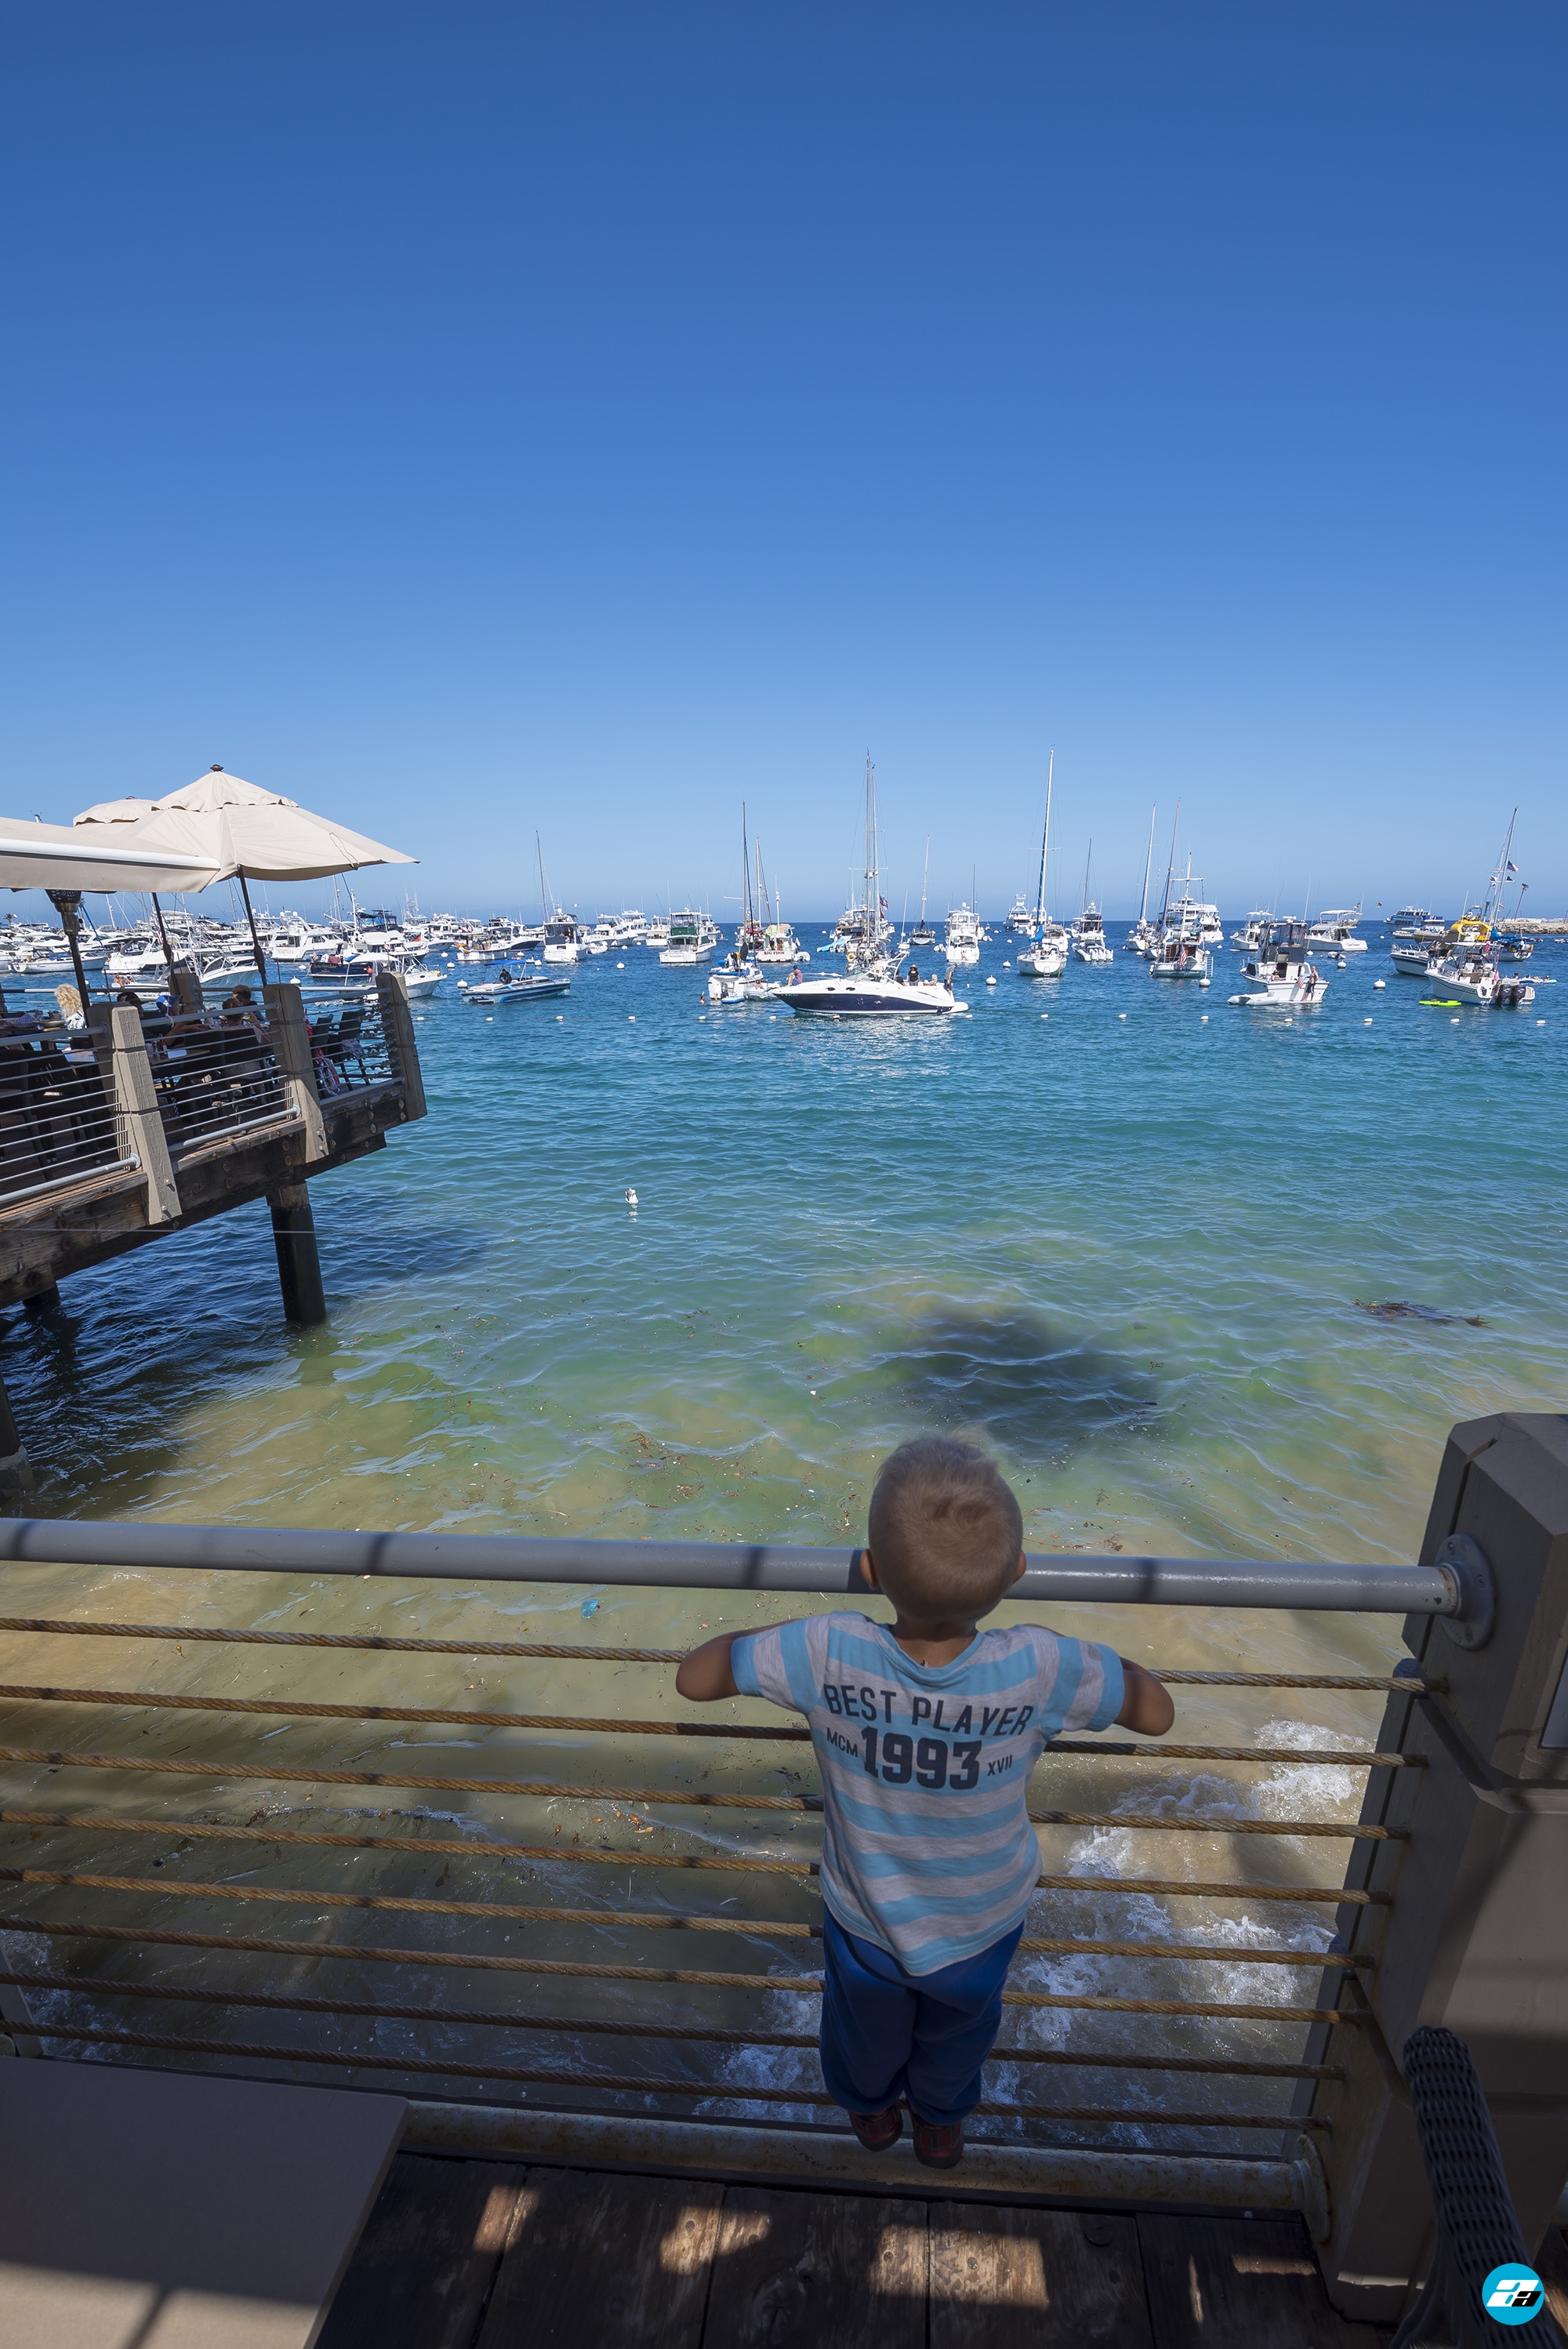 Catalina Island, Chanel Islands National Park, California, Pier. Boats in Water. Child looking.